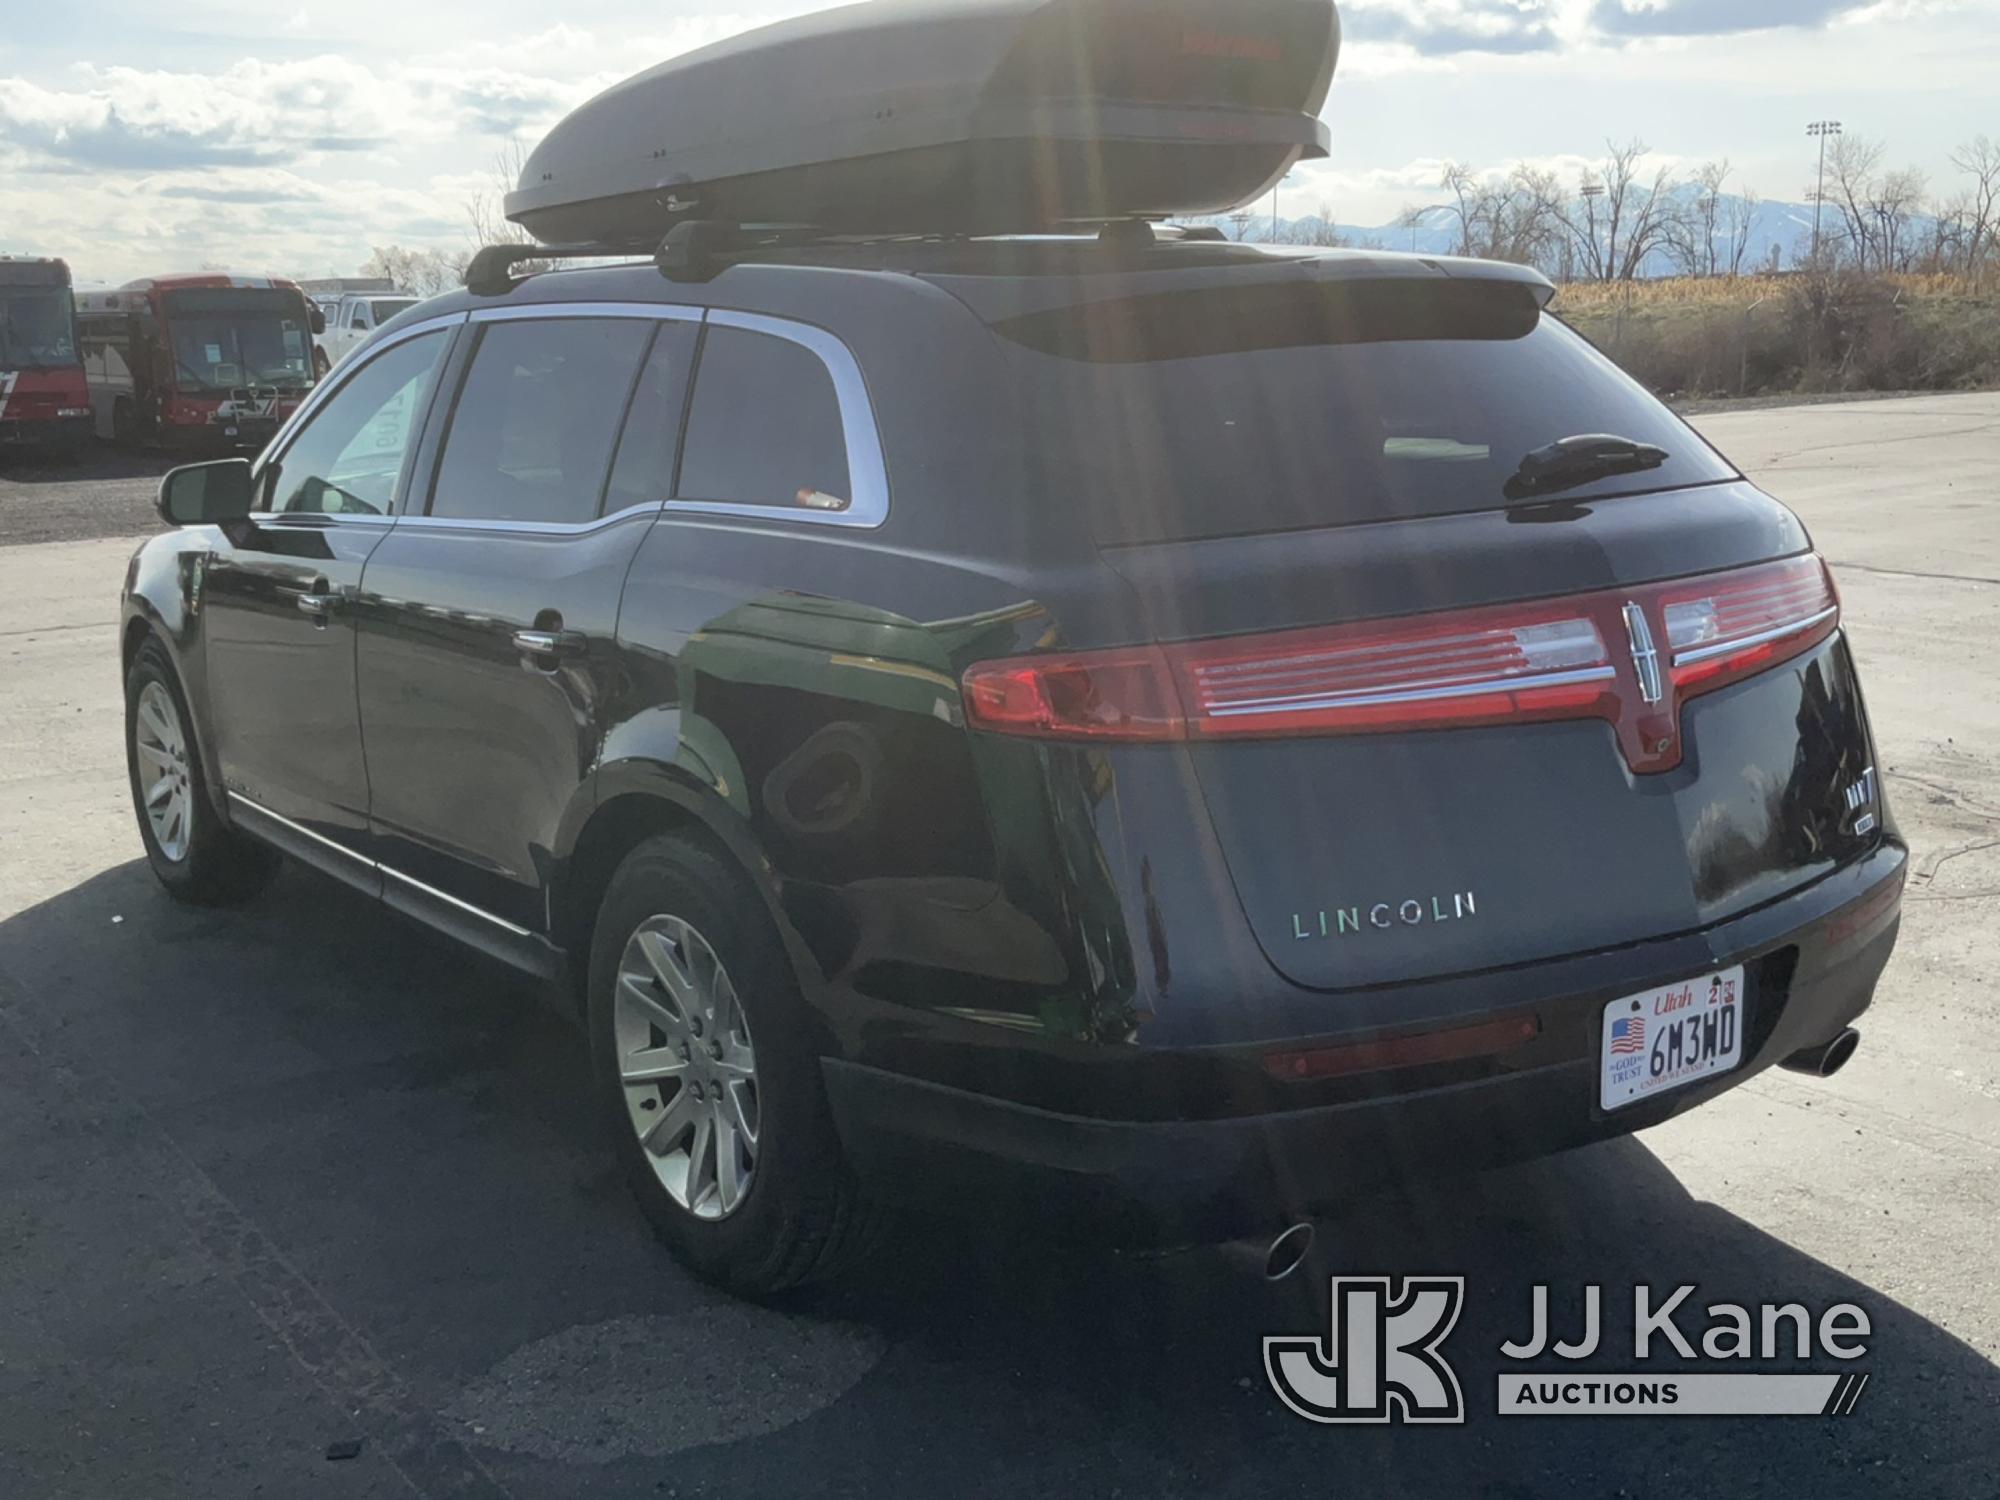 (Salt Lake City, UT) 2013 Lincoln MKT AWD 4-Door Sport Utility Vehicle Not Running, Condition Unknow